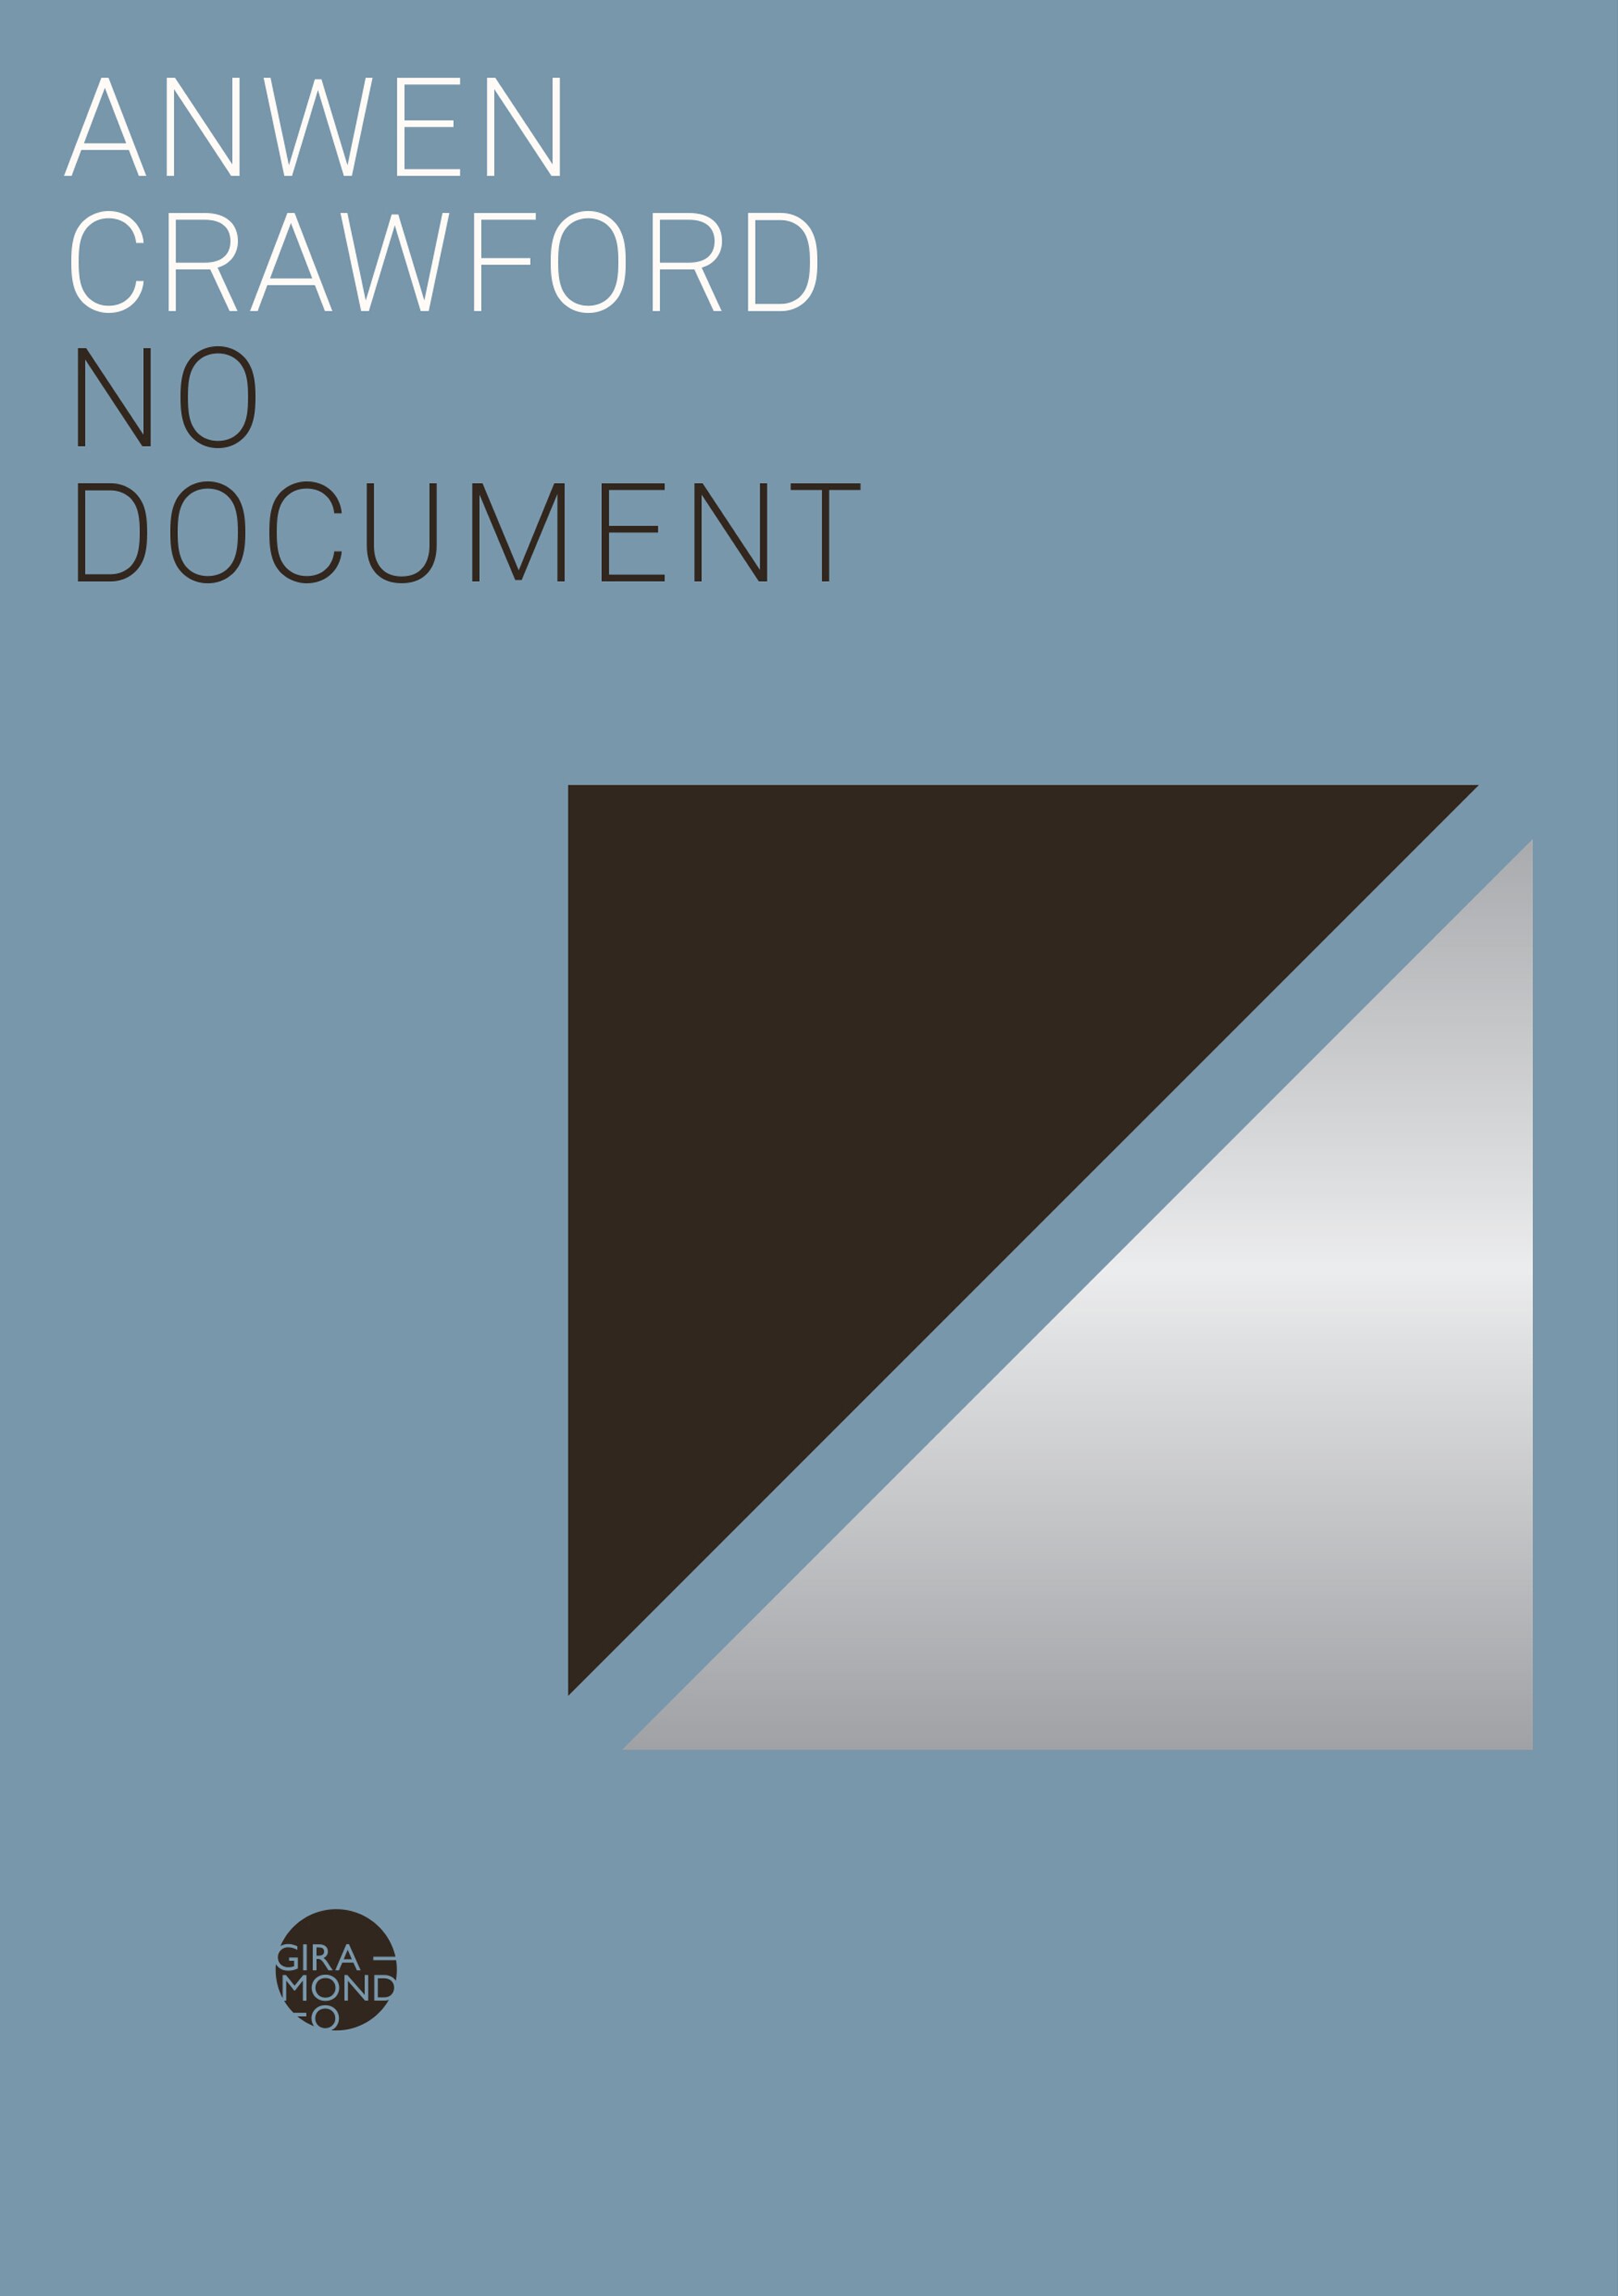 A book cover for Anwen Crawford's No Document features abstract triangles and circles against a pale blue background.